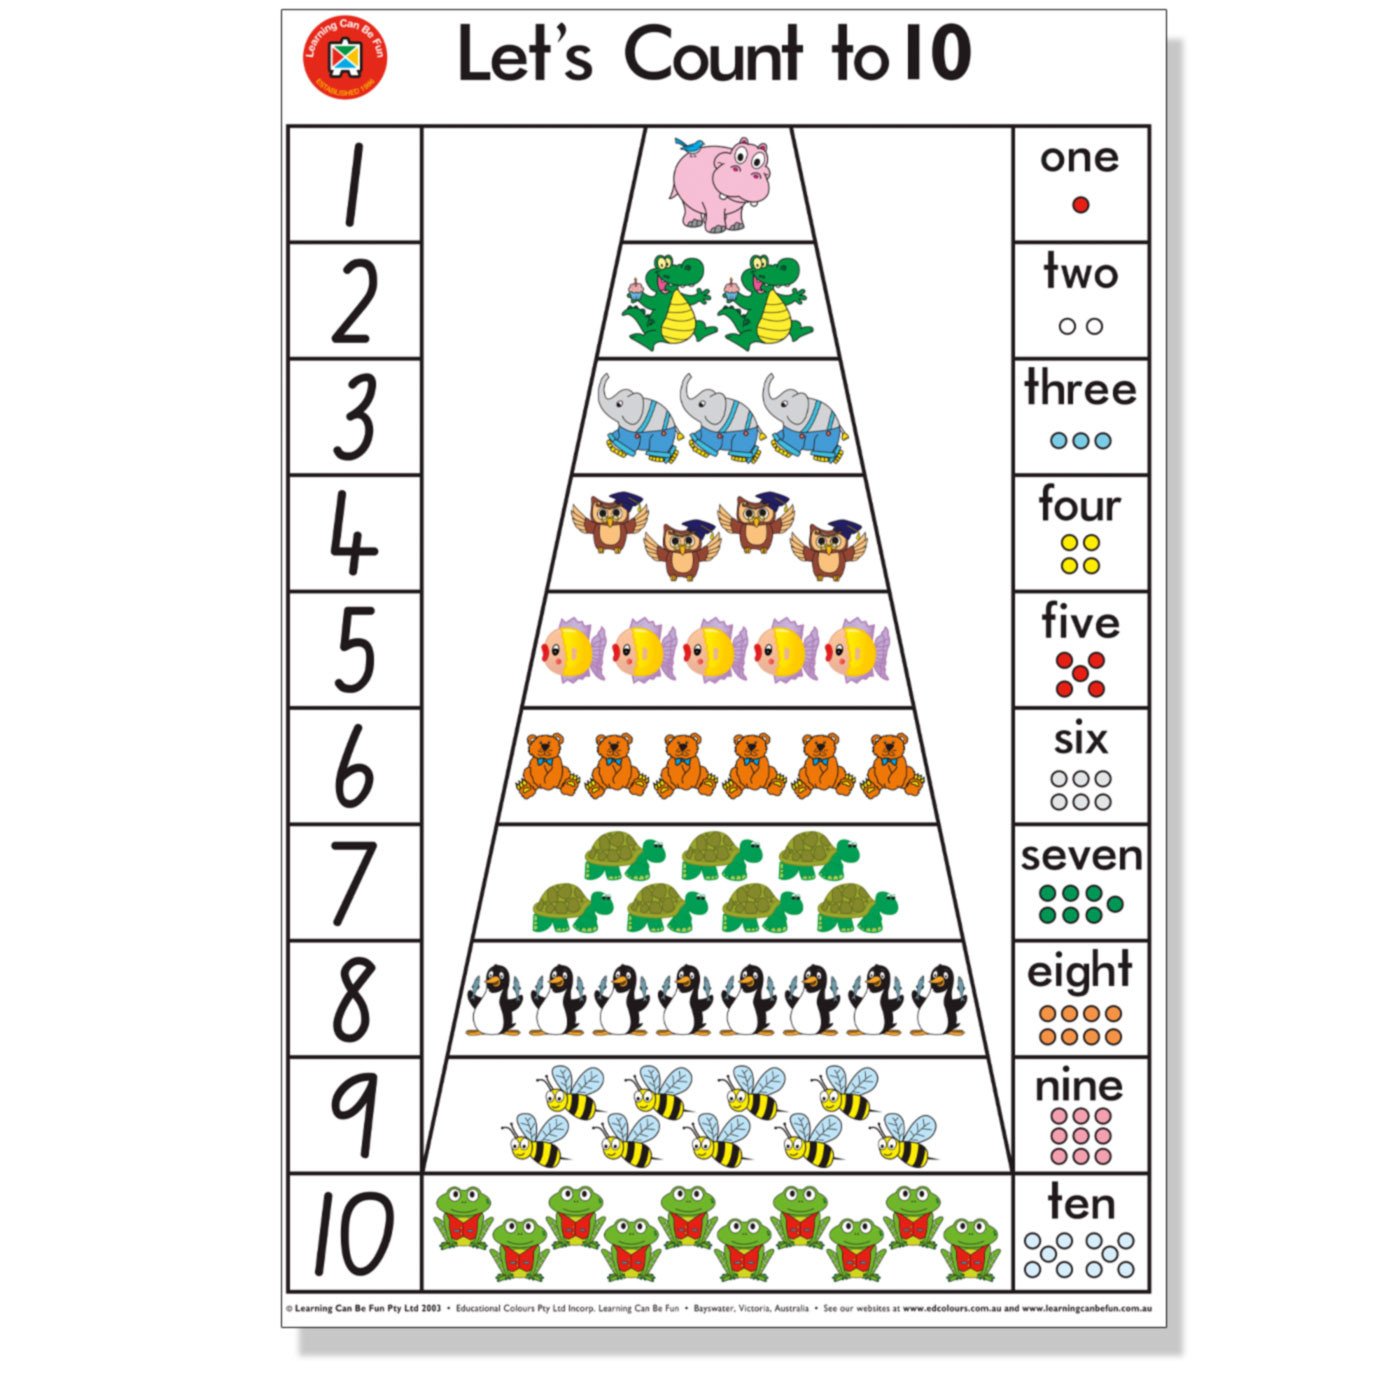 Learning Can Be Fun - Let's Count to Ten - Wall Chart